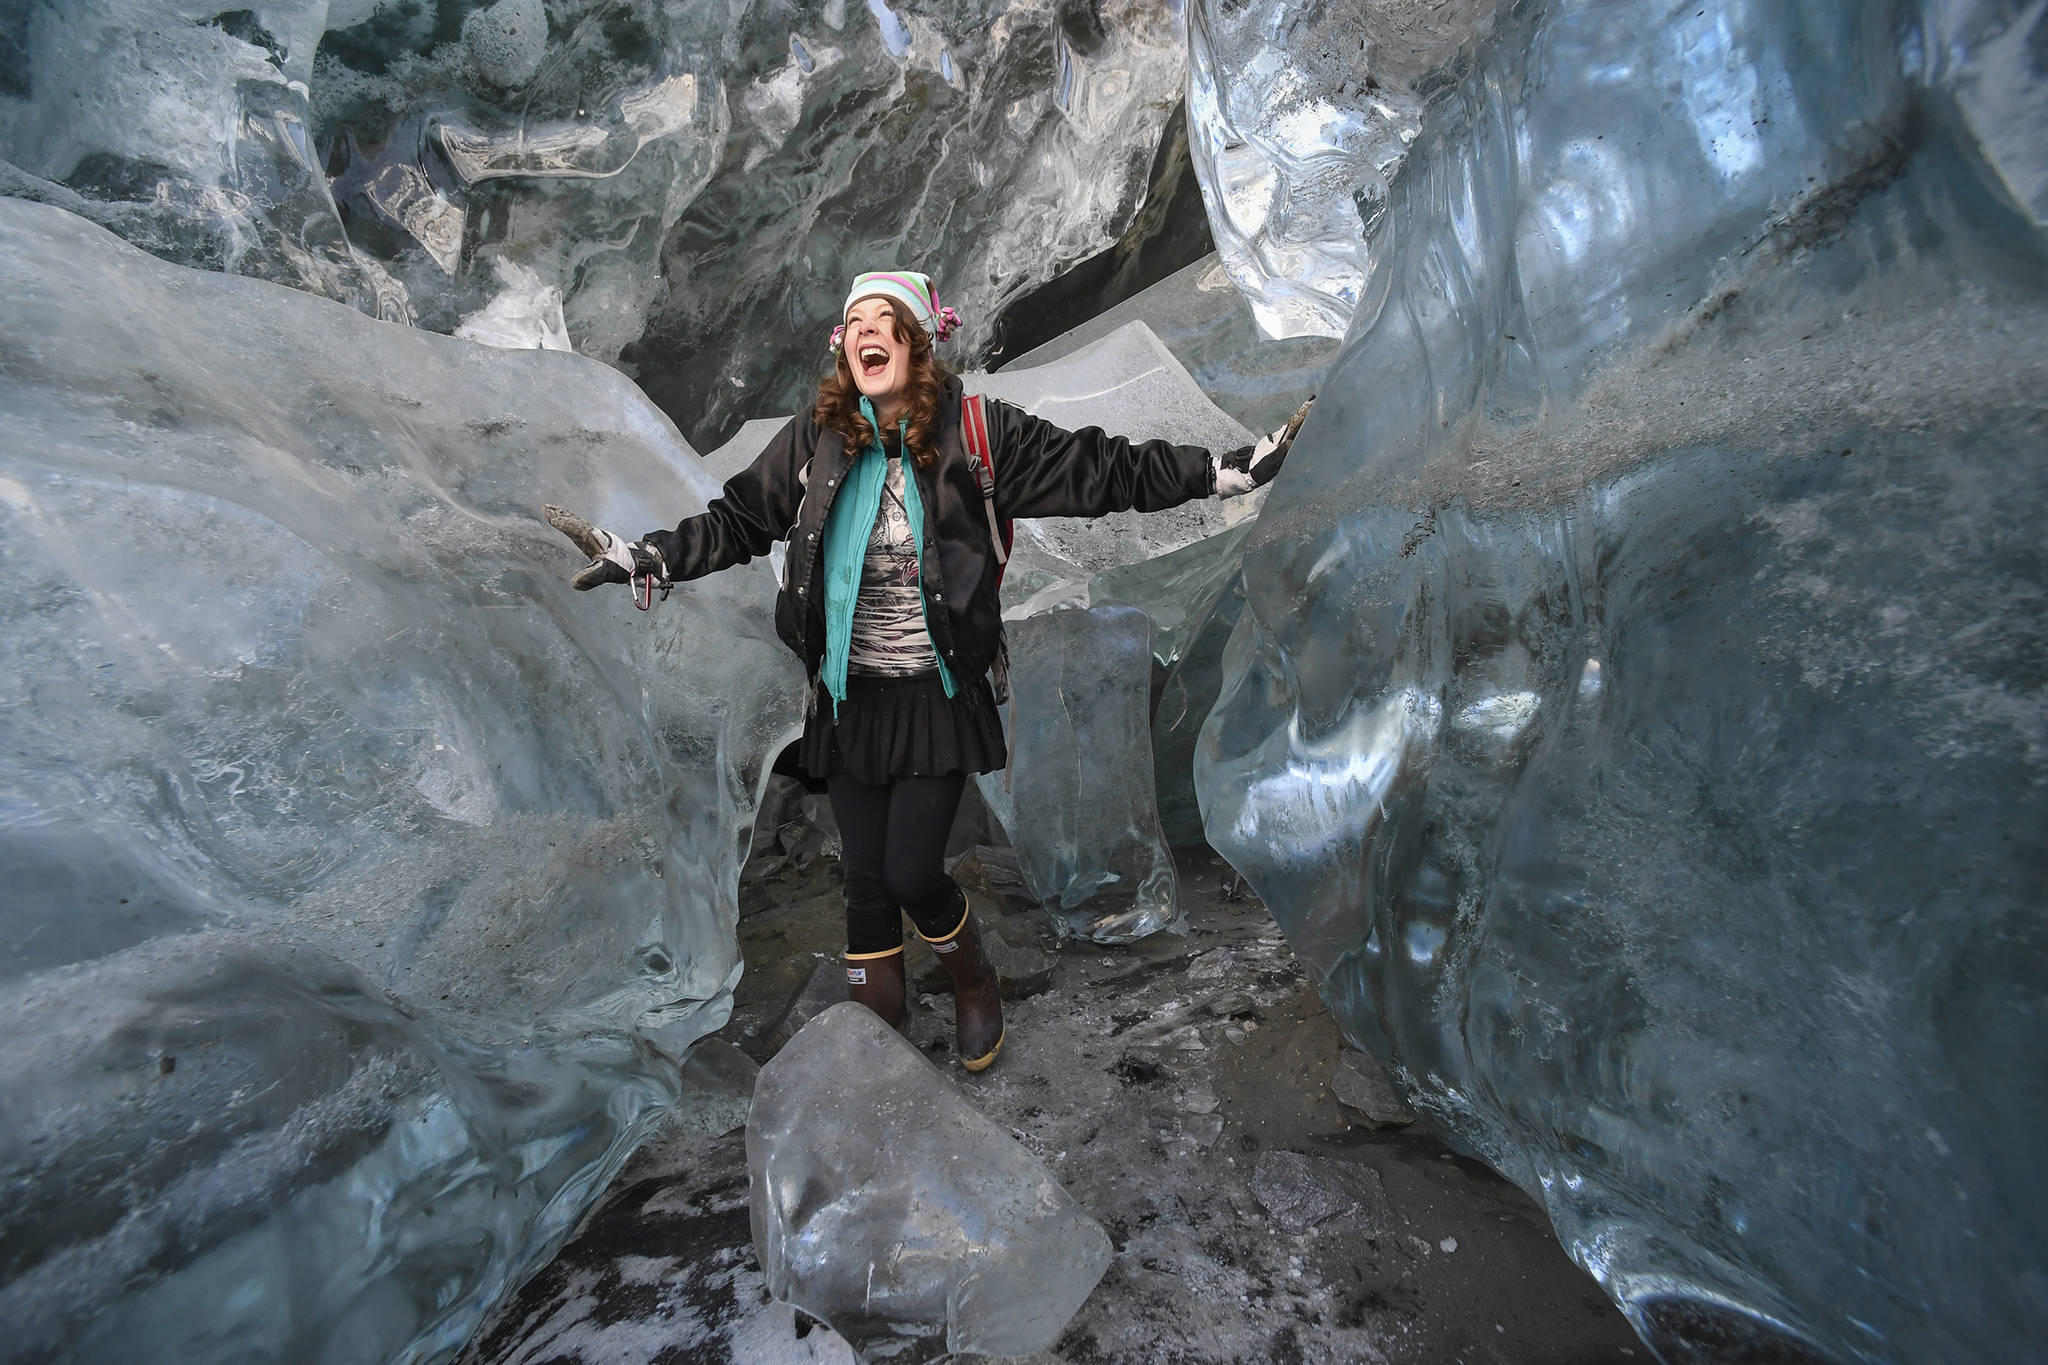 Stunning photos of the ice caves at the Mendenhall Glacier